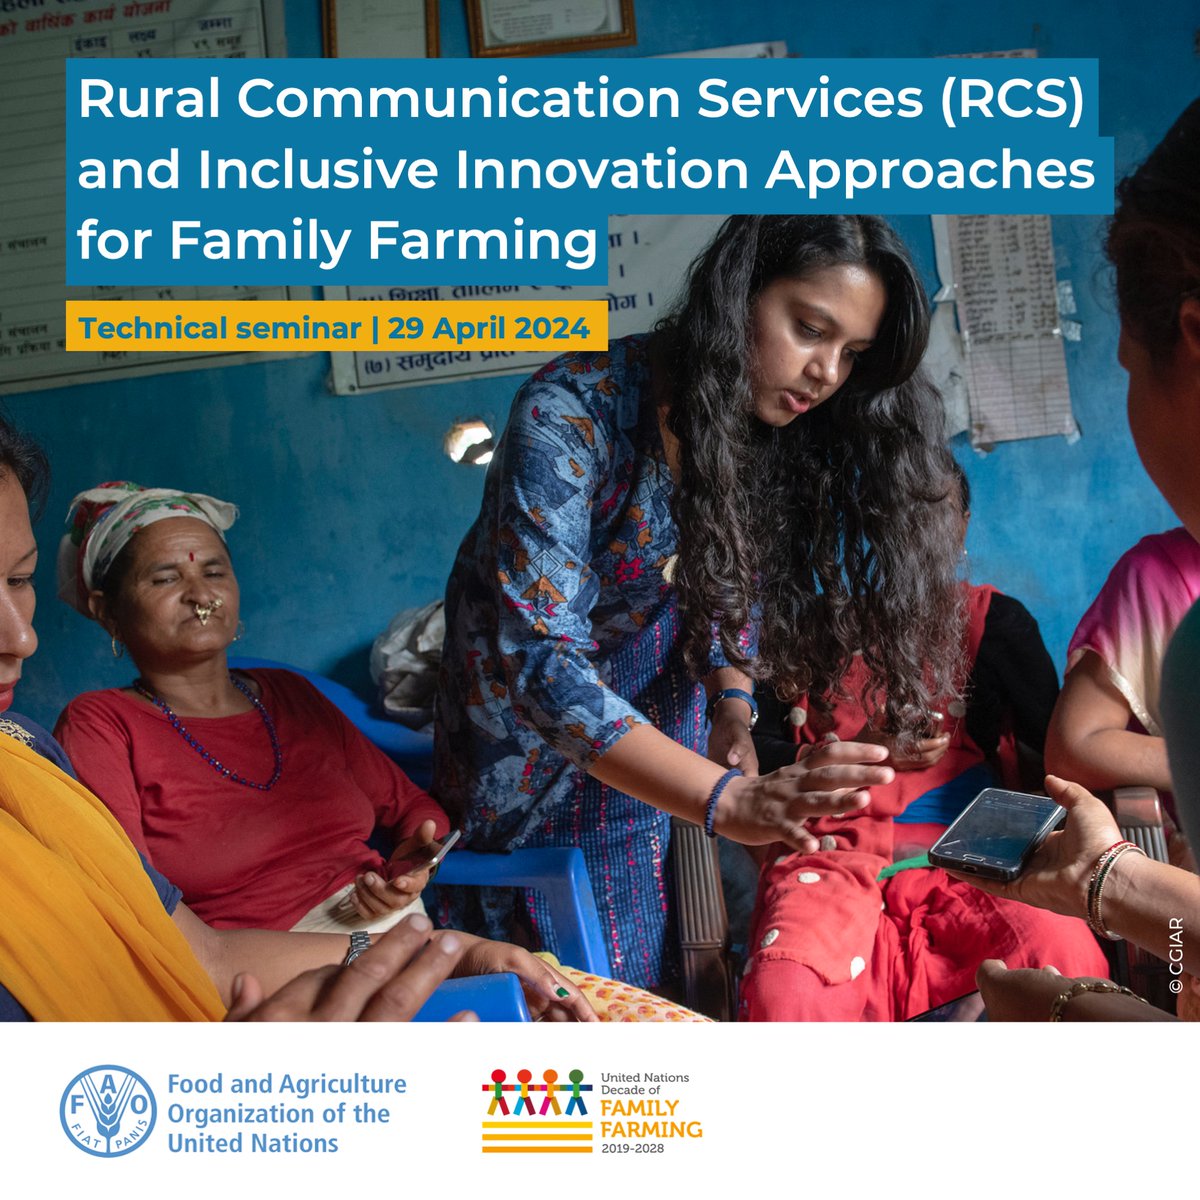 Join FAO’s technical seminar on Rural Communication Services (RCS) and Inclusive Innovation for Family Farming on 29 April 2024. Register as a participant here: bit.ly/3Q9tECL #rcs2024 #UNDFF